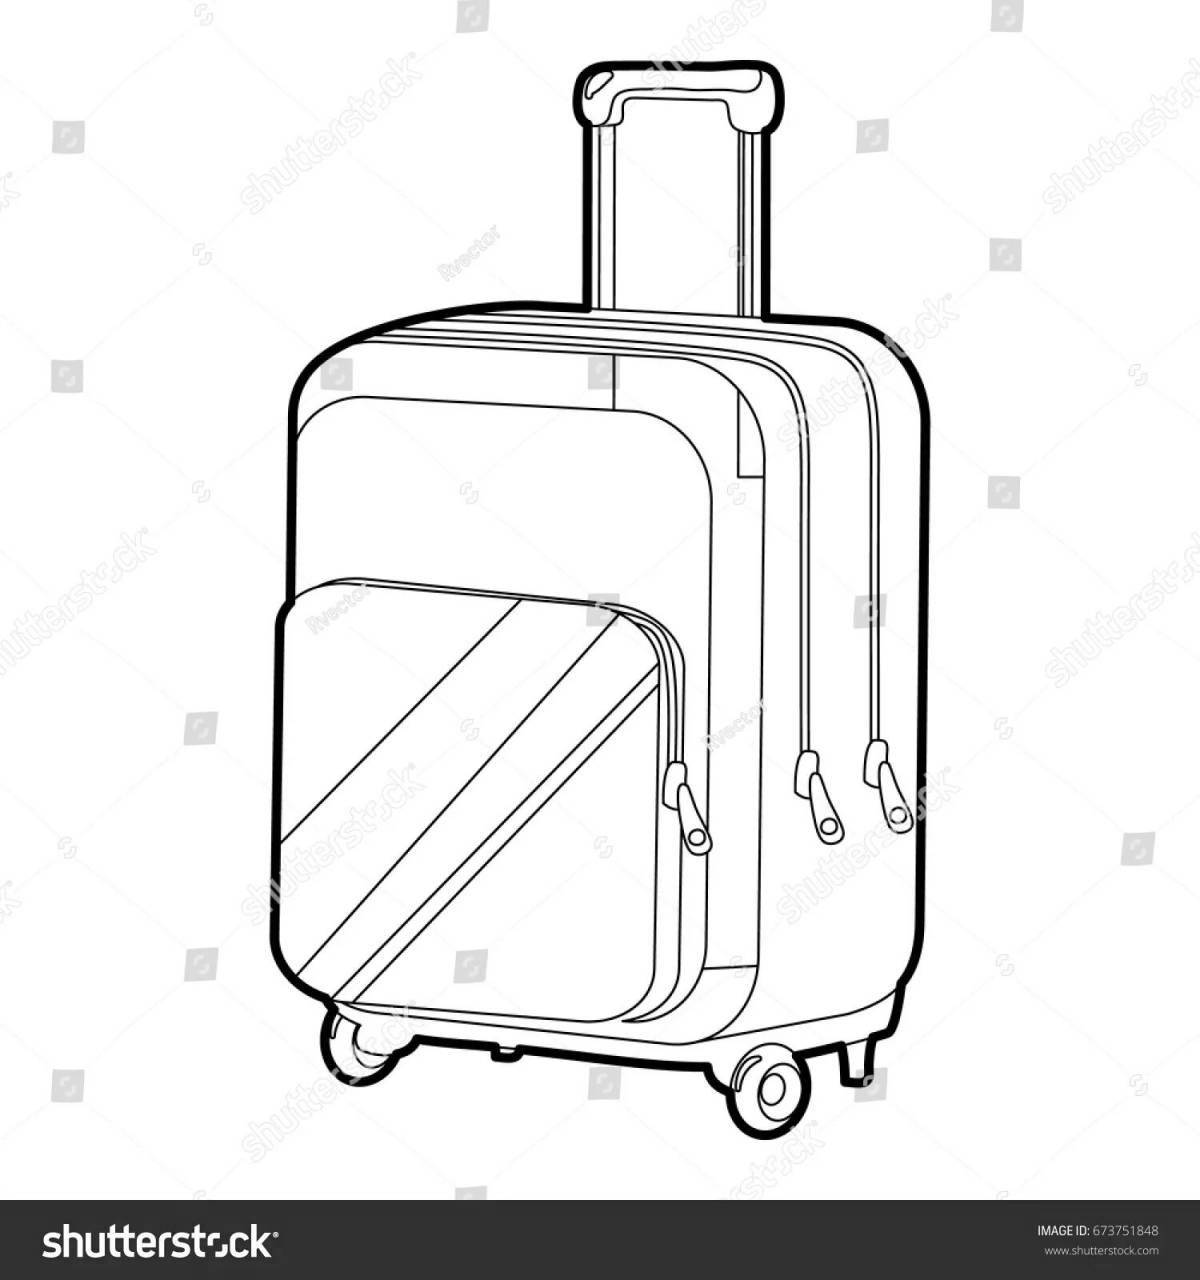 Coloring page of baby suitcase